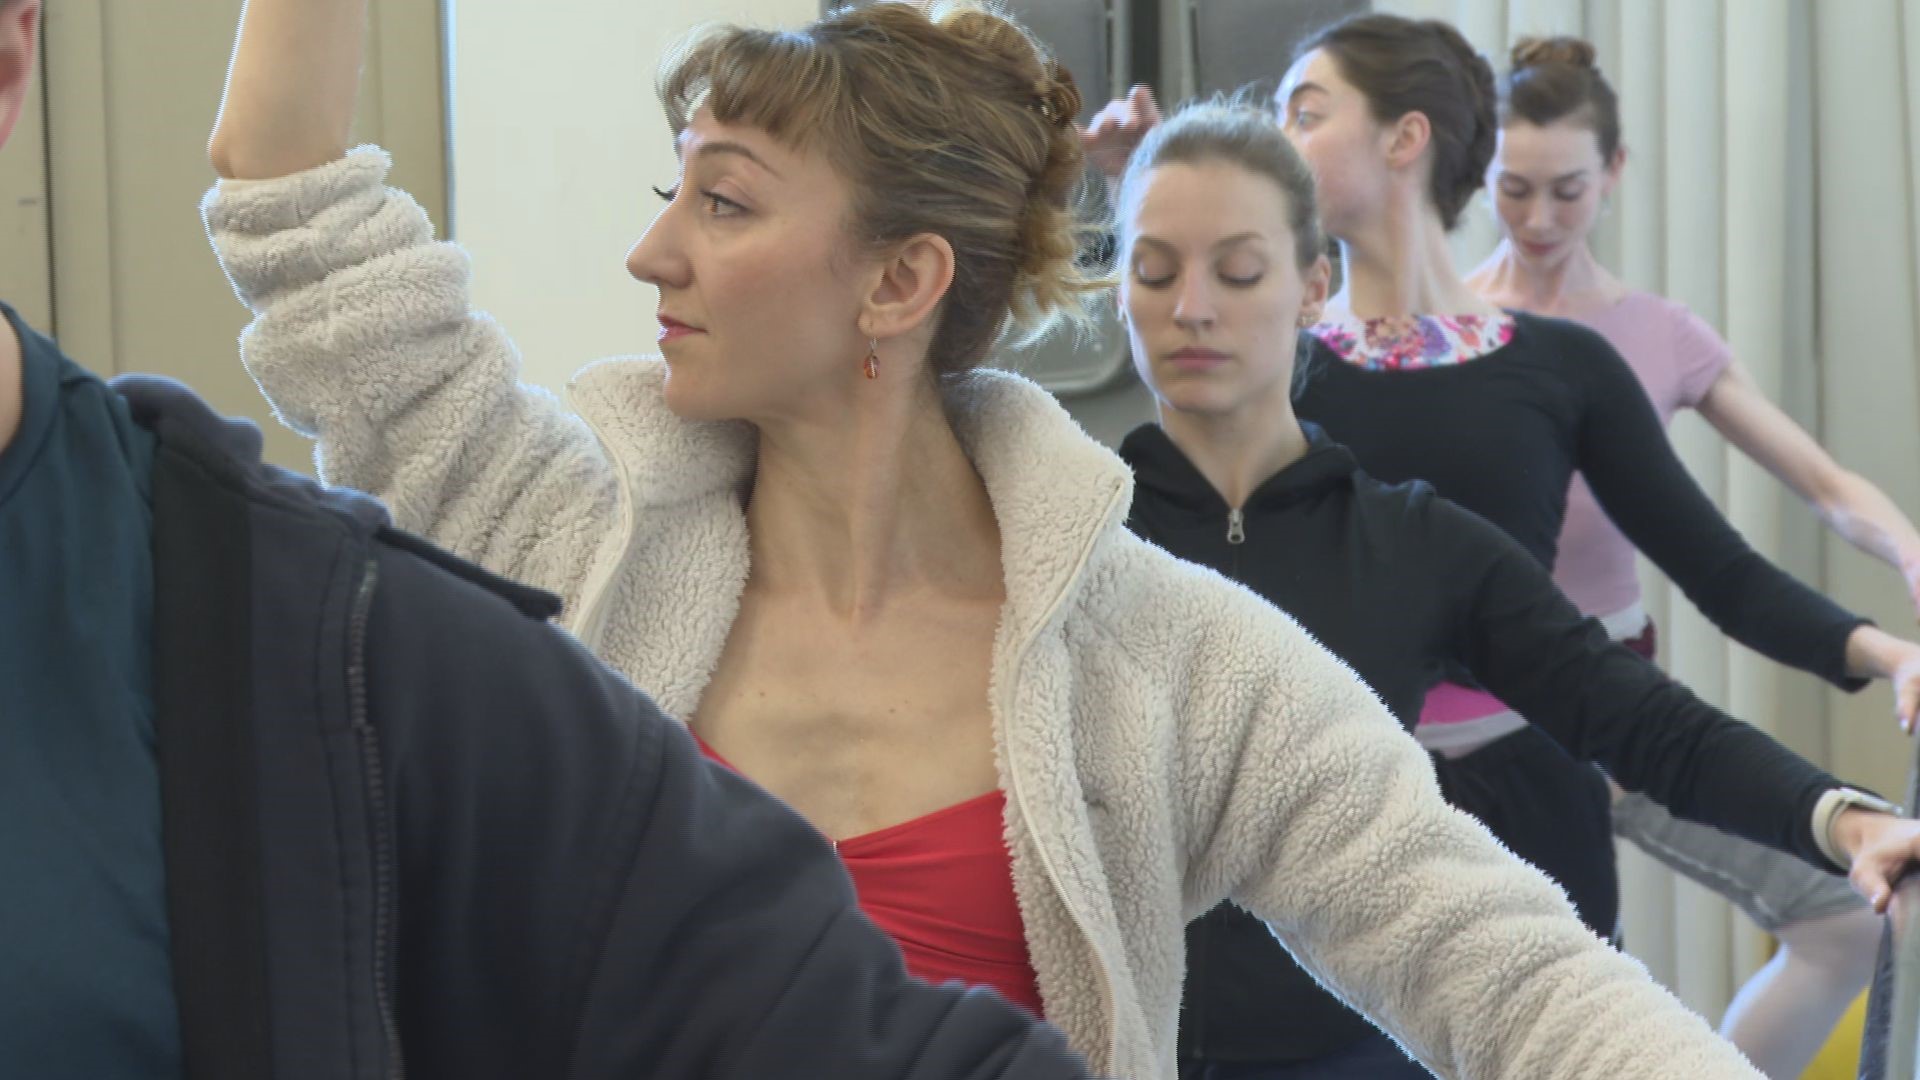 Natalia Ashikhmina will perform for the final time in the Louisville Ballet's "Romeo and Juliet."